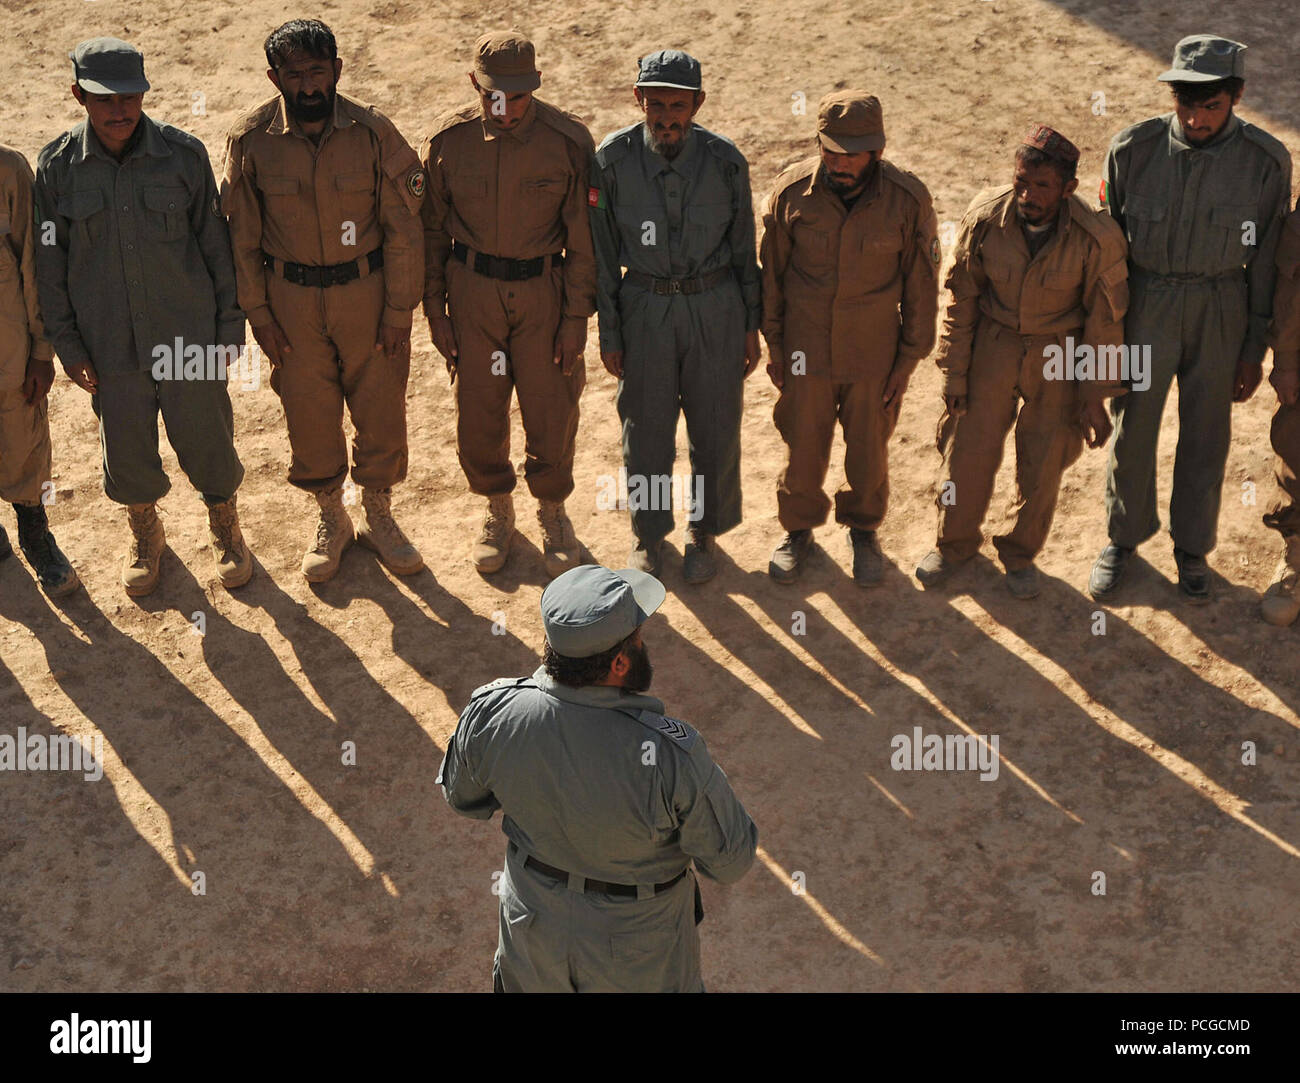 Afghan Local Police recruits stand in formation as they listen to ALP instructors during the academy's opening ceremony in Gizab district, Uruzgan province, Afghanistan, Dec 28. The ALP is a defensive, community-oriented force that brings security and stability to rural areas of Afghanistan. Stock Photo